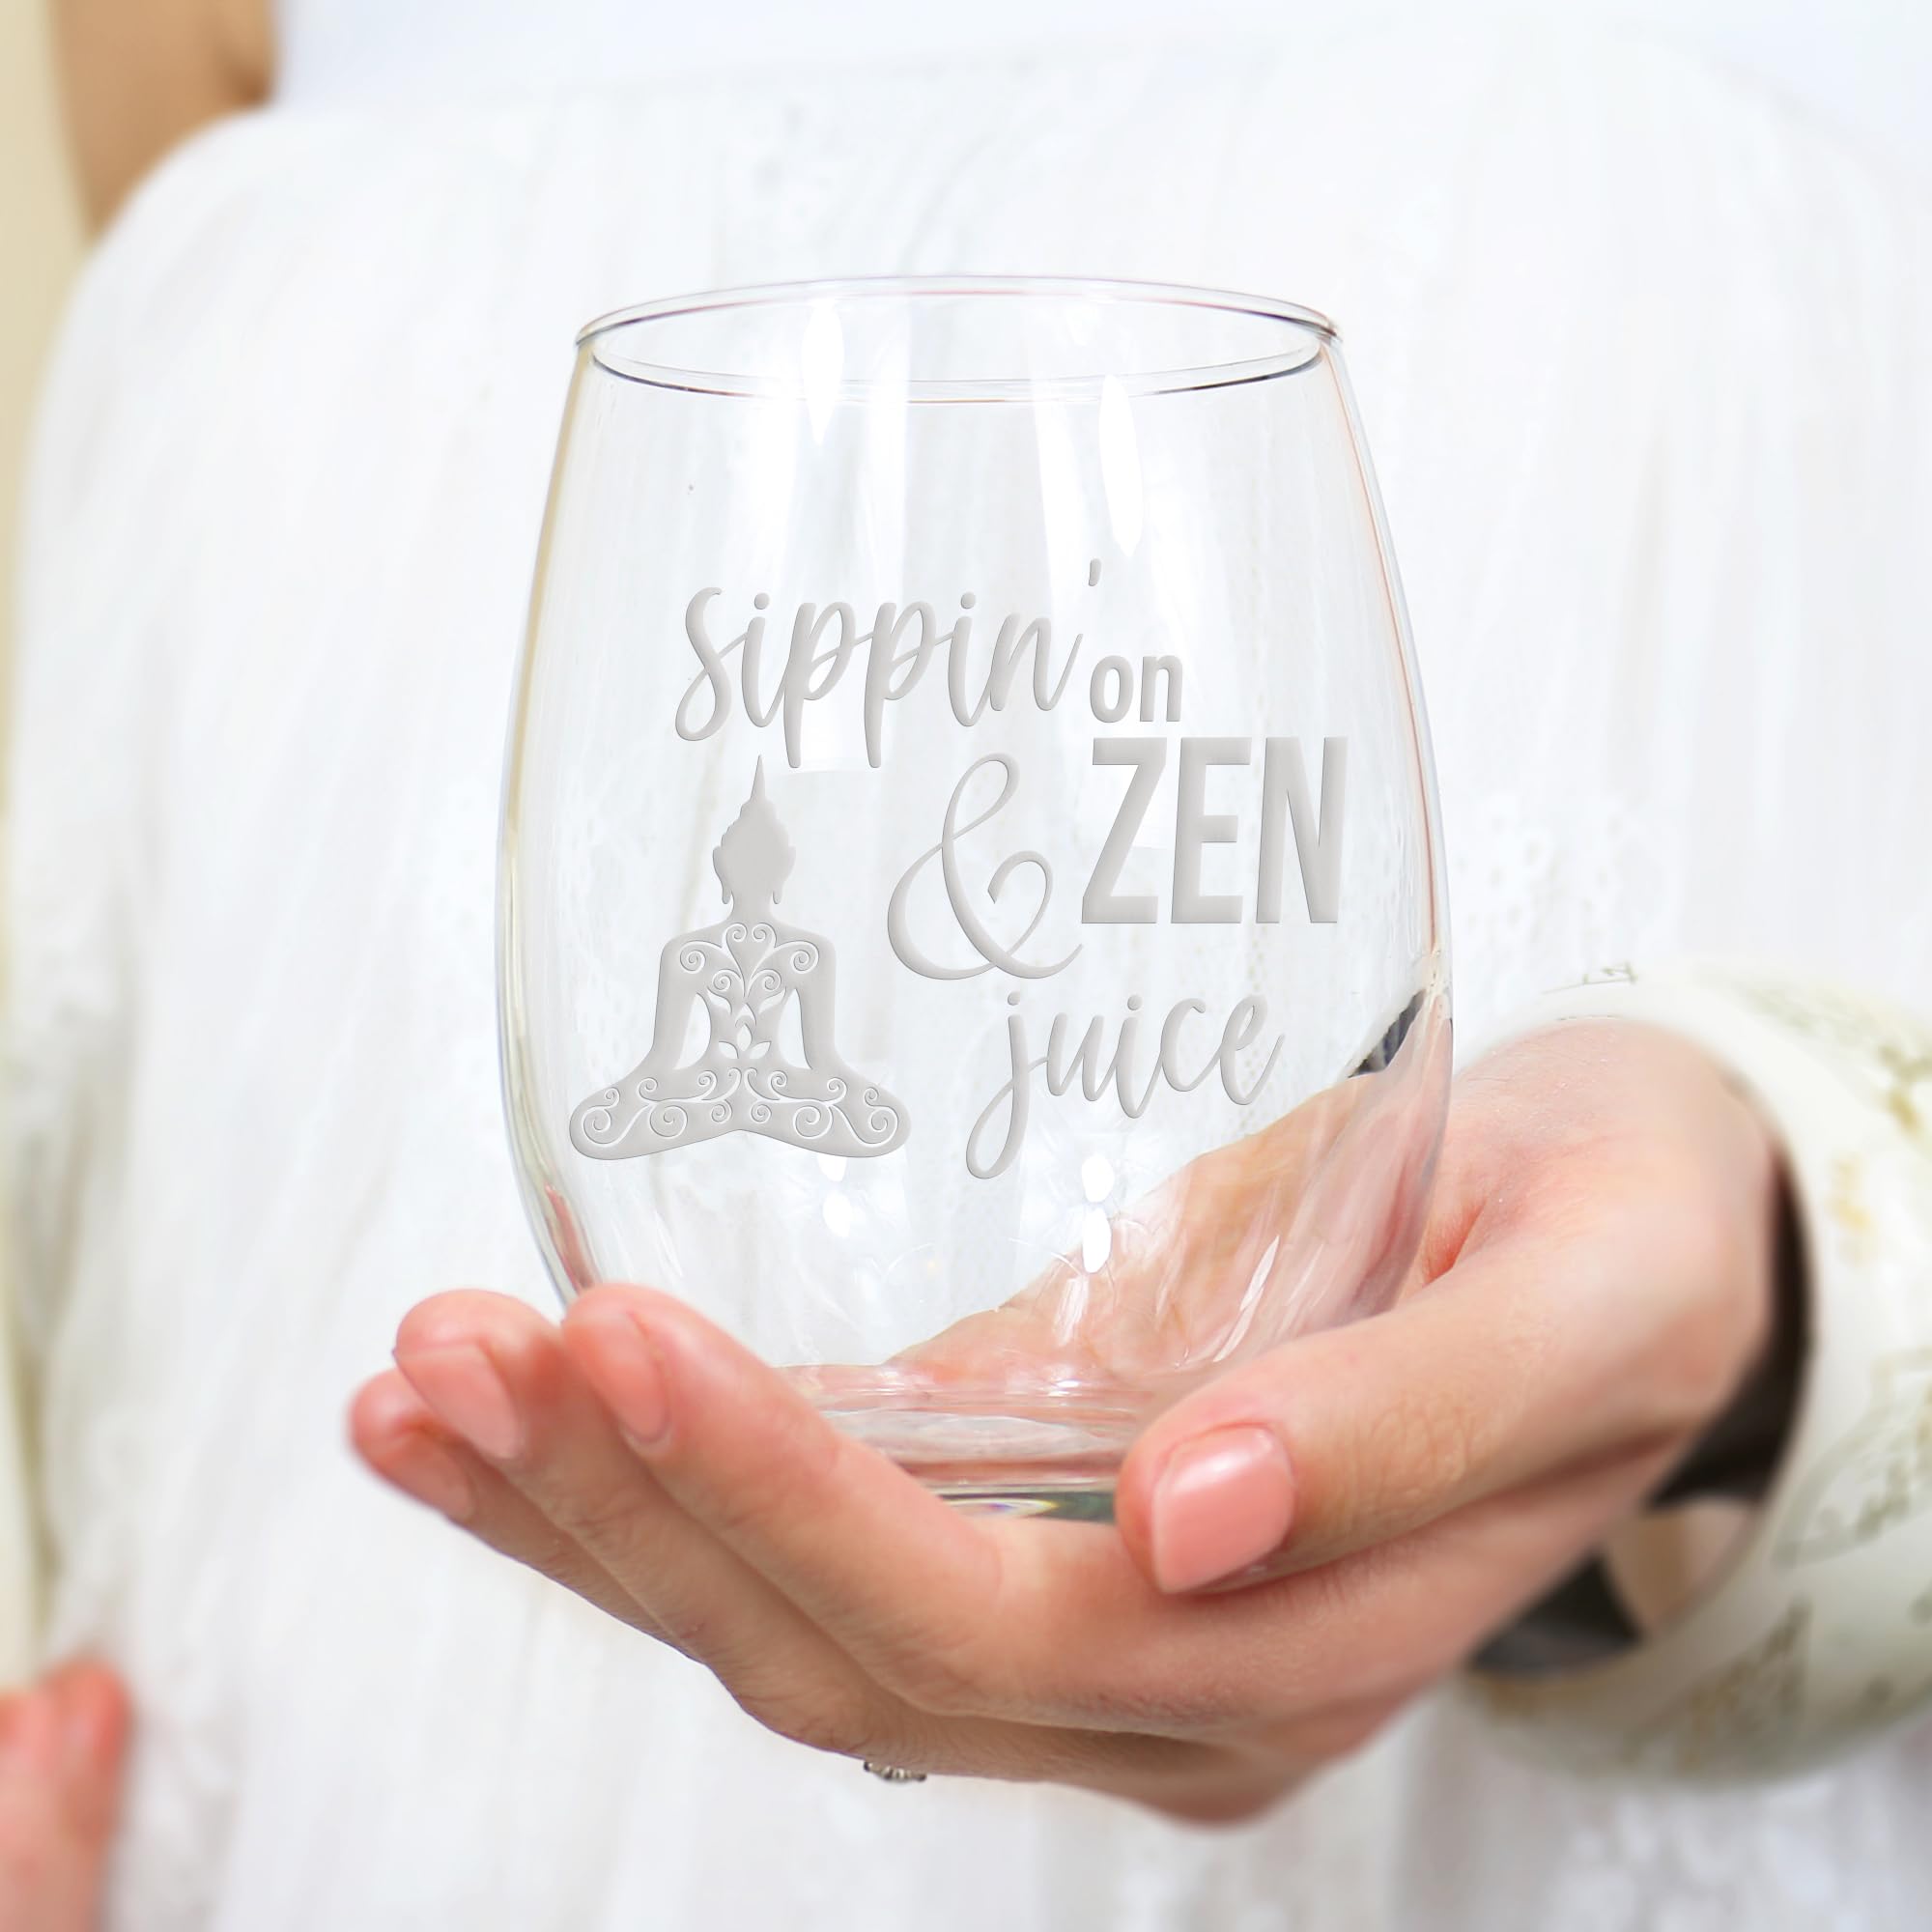 Sippin on Zen and Juice Yoga Stemless Wine Glass - Yoga Gift, Namaste, Gift For Relaxation, Pun Gift, Wine Lover, Her, Mother, Best Friend Gift, Music Gift